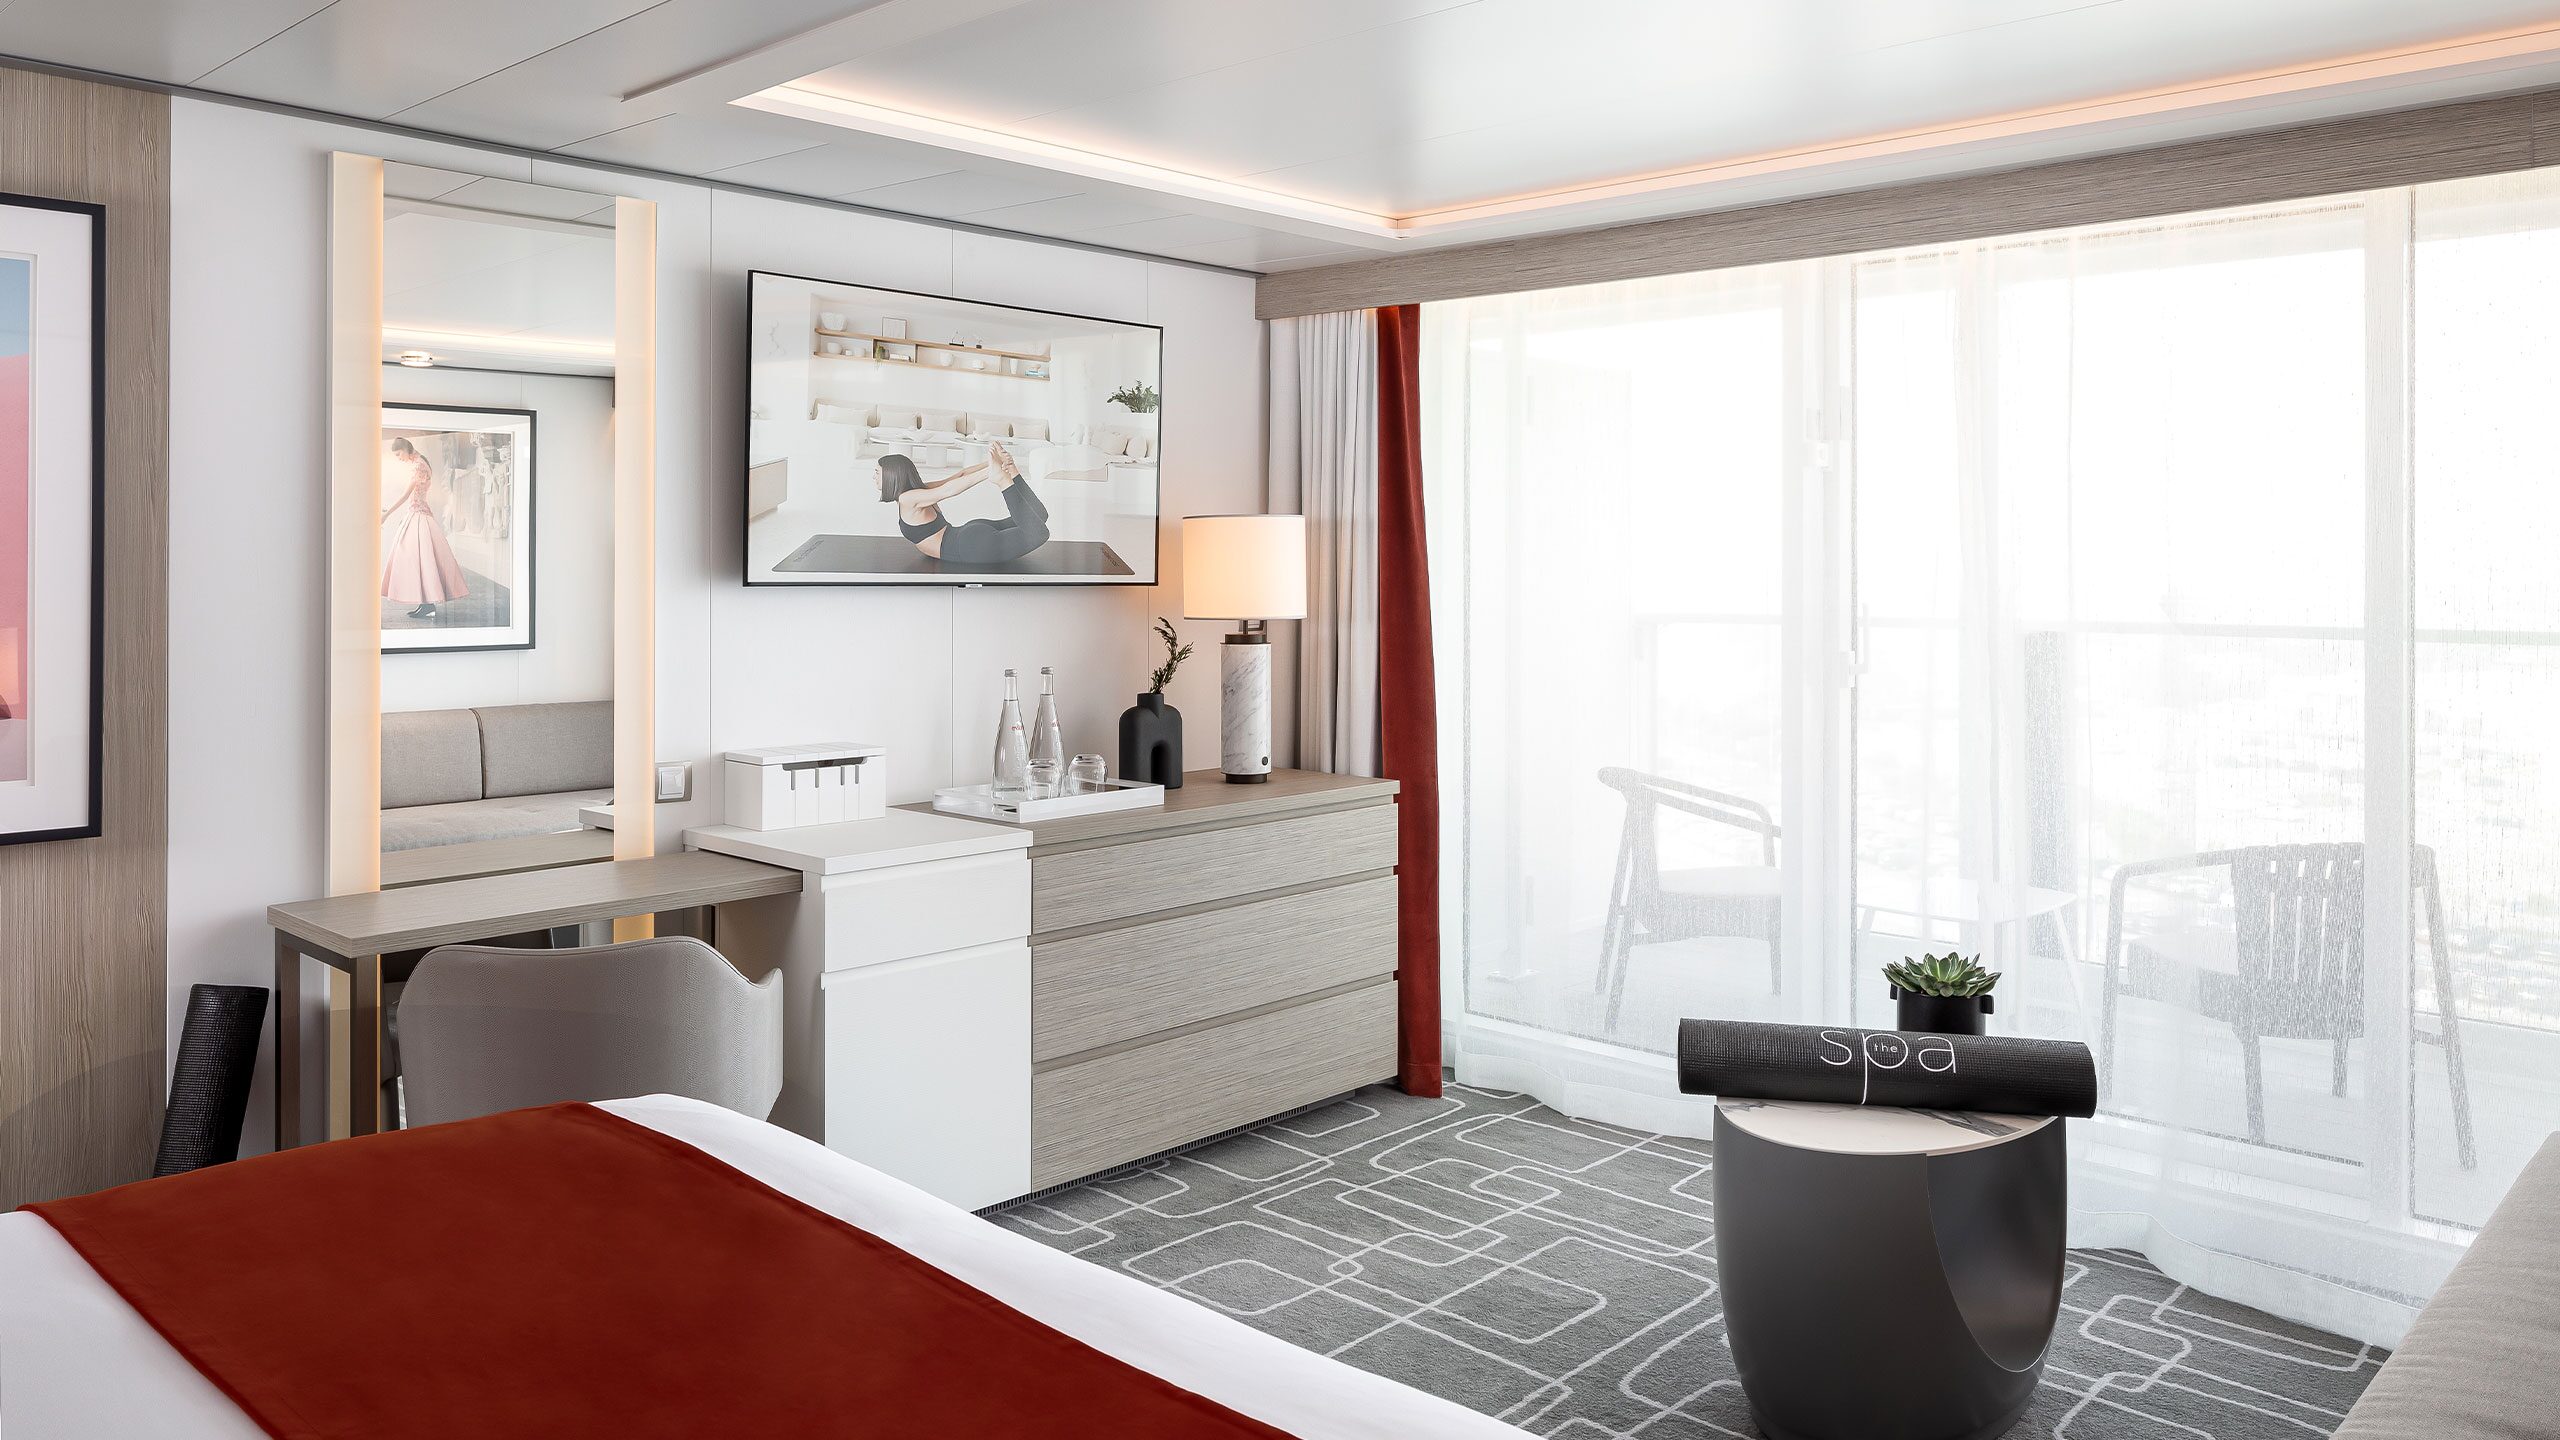 https://www.celebritycruises.com/content/dam/celebrity/new-images/beyond-new-images/aqua-sky-suite-BY-2560x1440.jpg